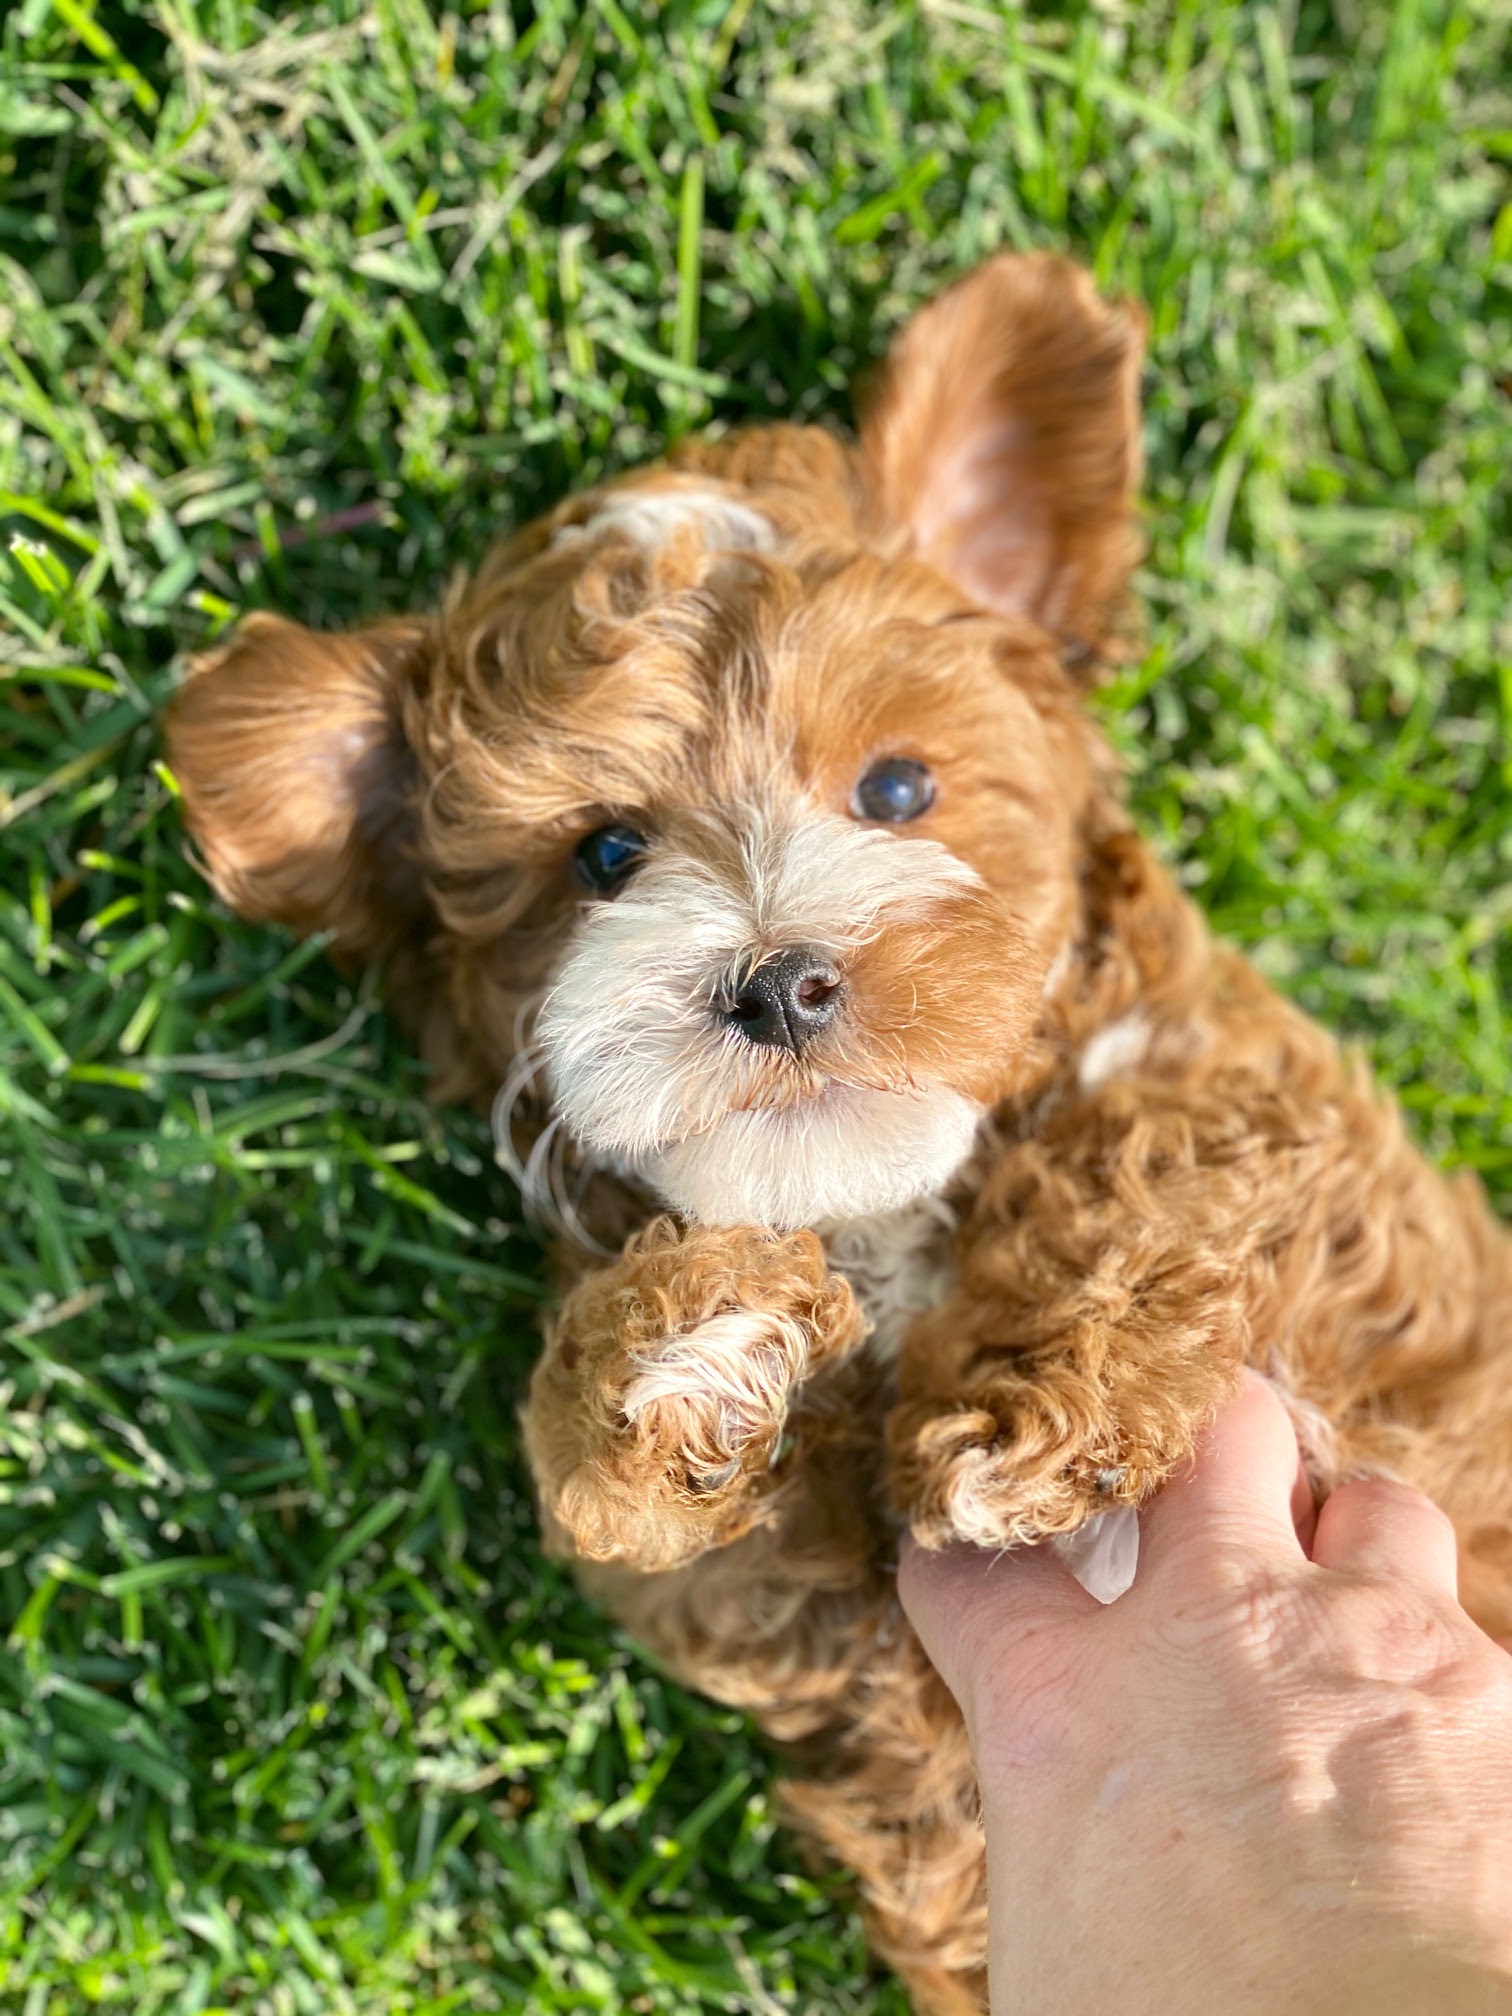 An individual holds a tiny brown dog with care and tenderness.